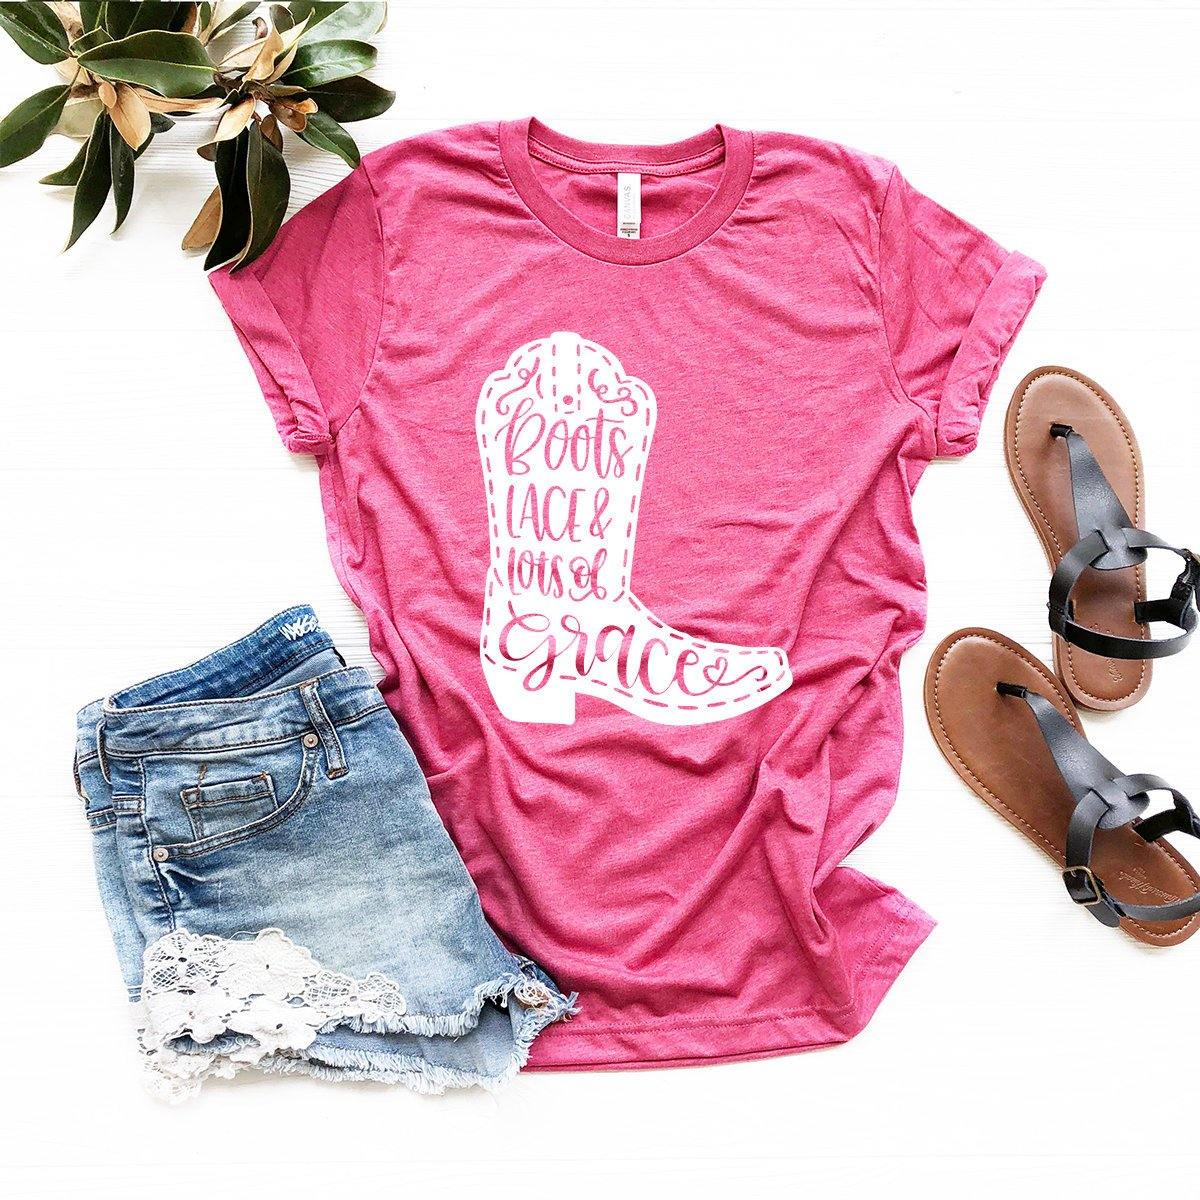 Western Girl Shirt, Country Girl Shirt, Southern Girl Shirt, Boots Lace And Lots Of Grace Shirt, Cowgirl Boots Shirt, Southern Shirt - Fastdeliverytees.com